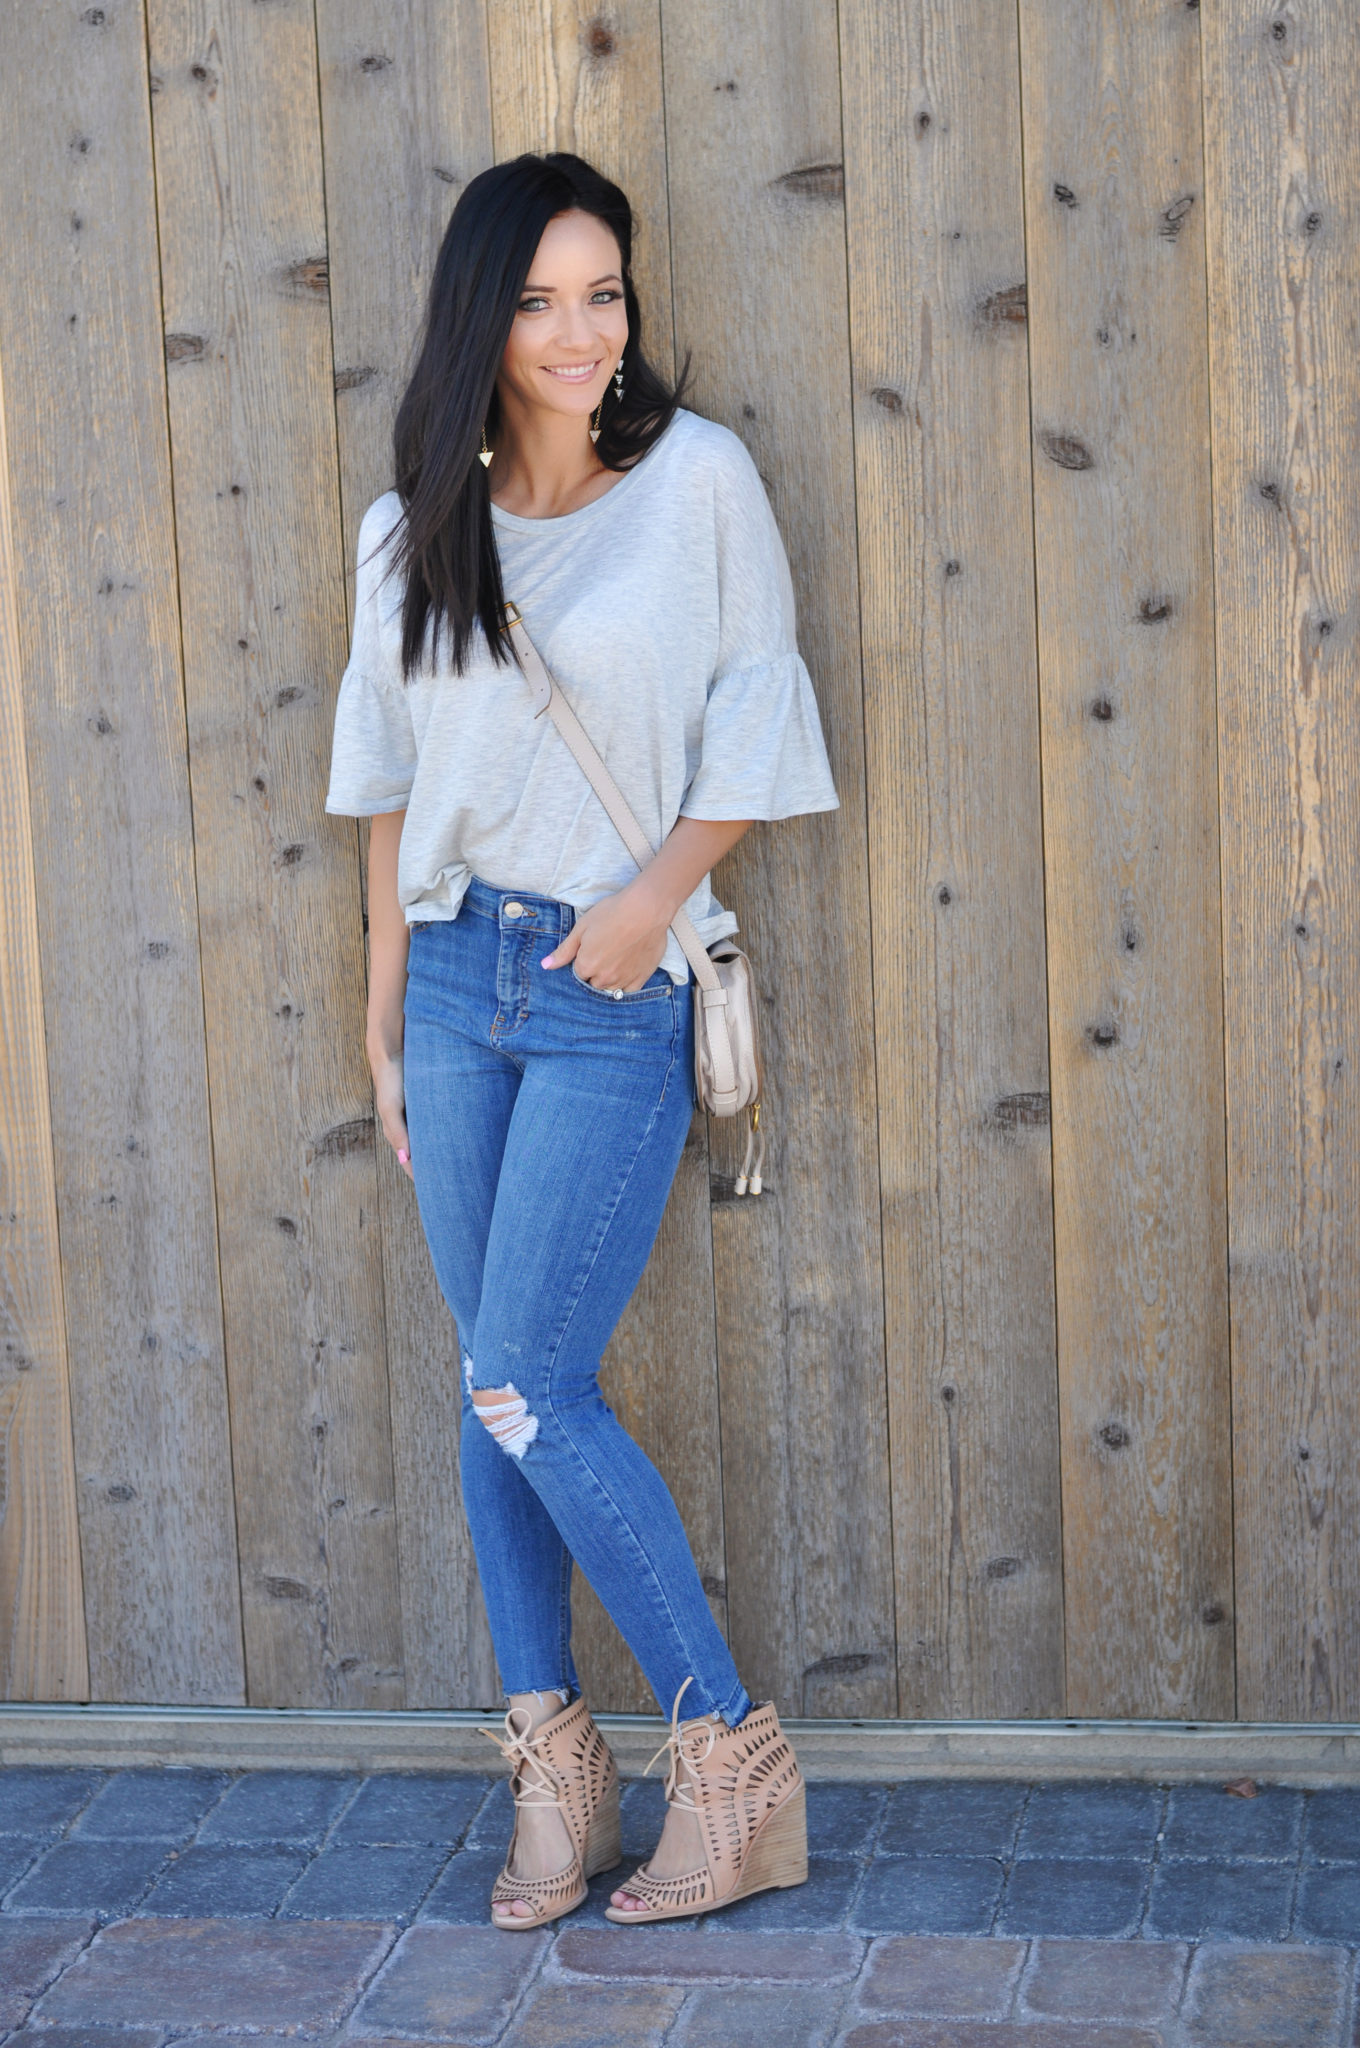 Cute Spring Outfits featured by top US fashion blog Outfits & Outings; Image of a woman wearing grey top, jeans and nude wedges.